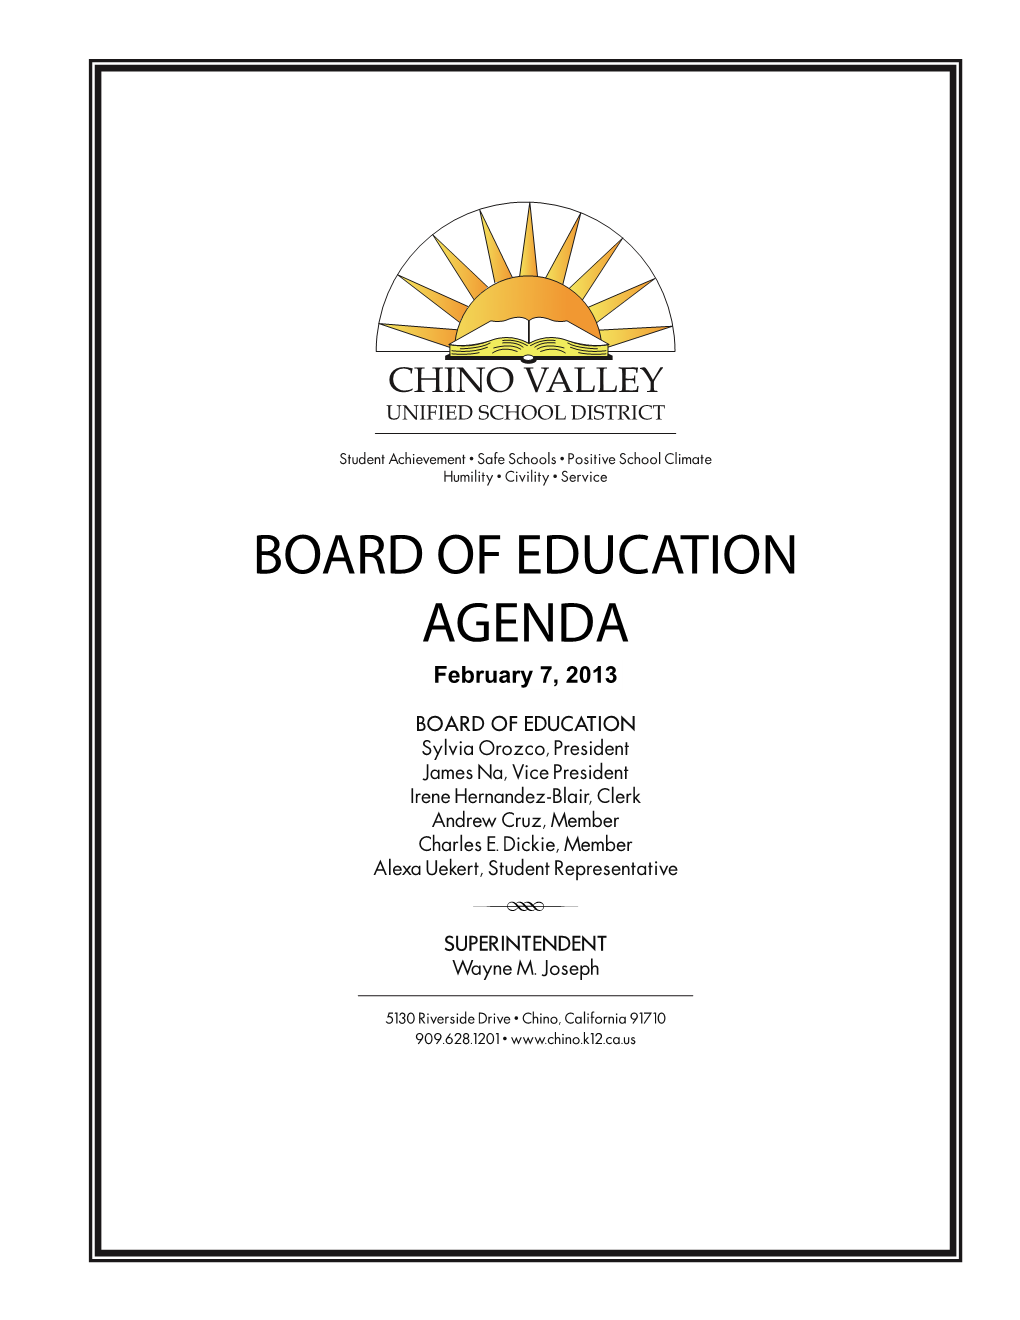 CHINO VALLEY UNIFIED SCHOOL DISTRICT REGULAR MEETING of the BOARD of EDUCATION 5130 Riverside Drive, Chino, CA 91710 4:30 P.M